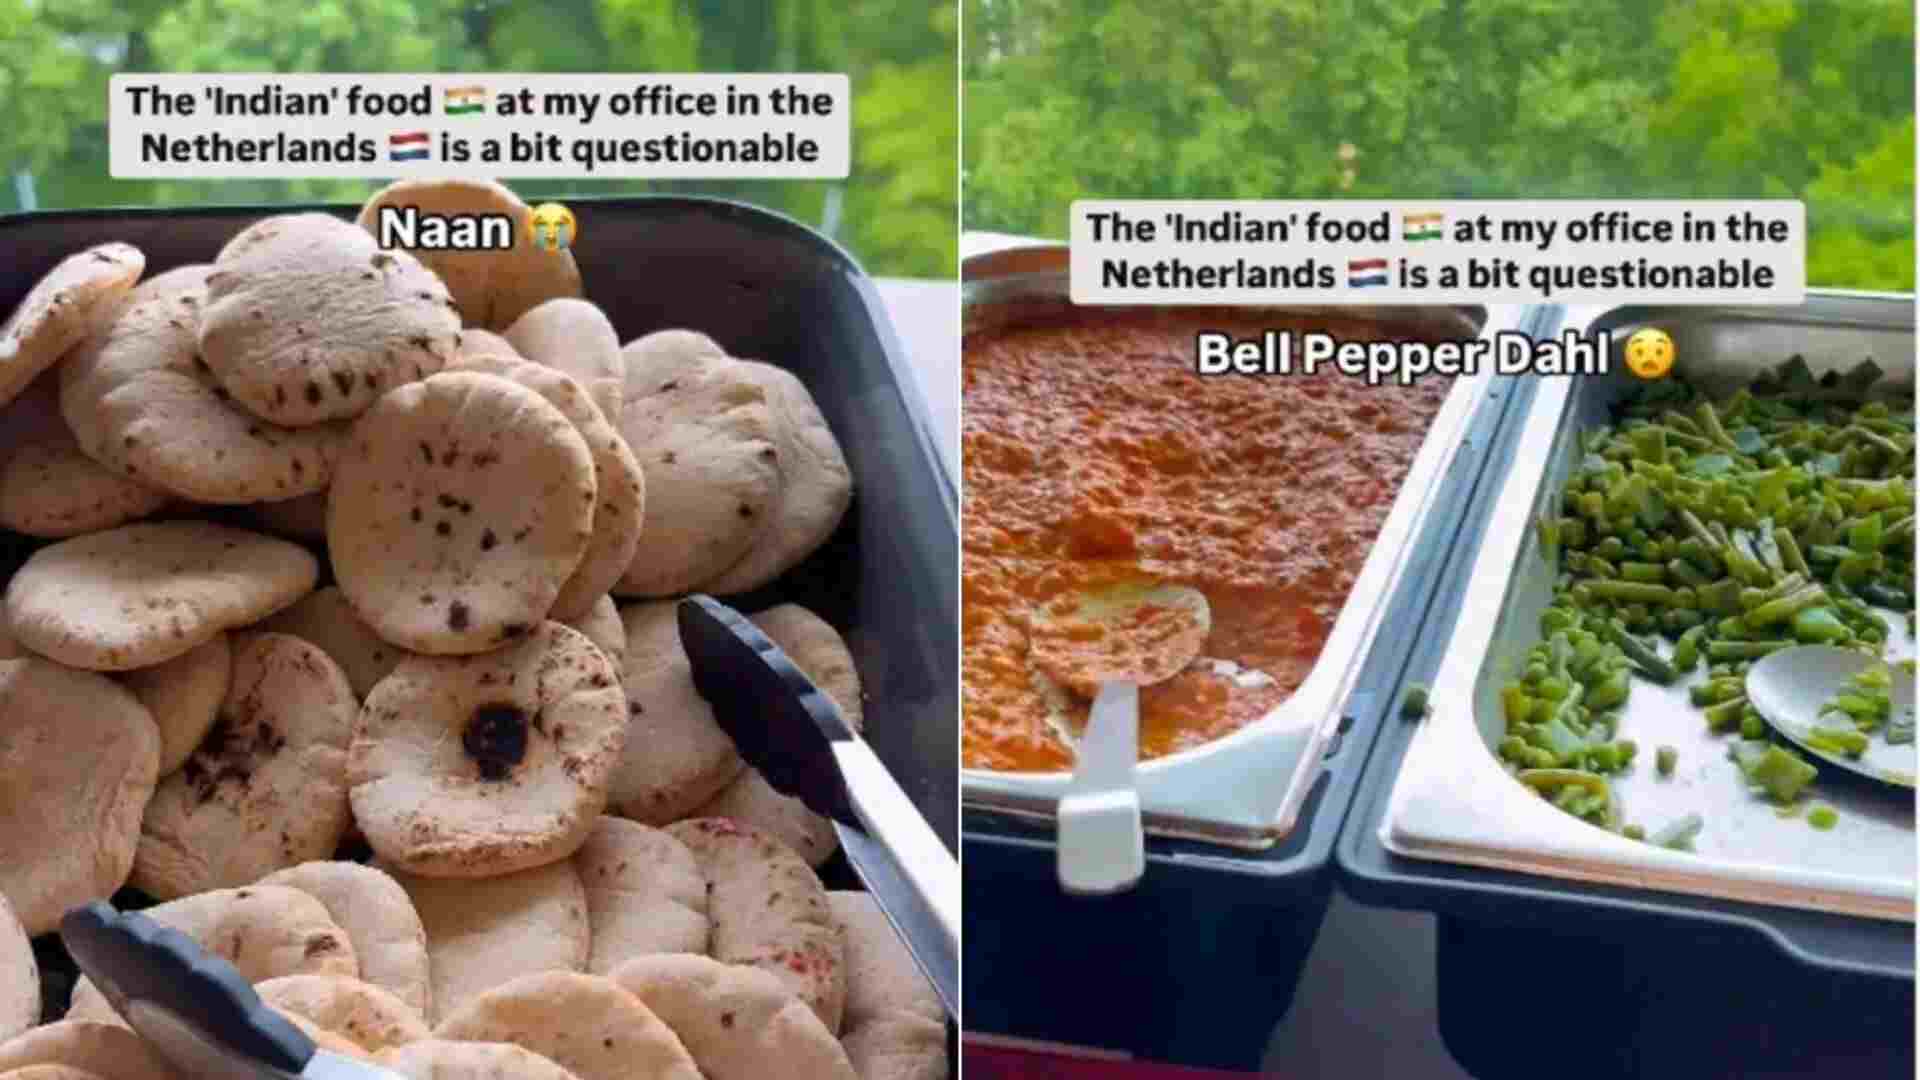 Bell Pepper Dal And Padima Chutney? Indian Food At Dutch Office Is Nightmarish